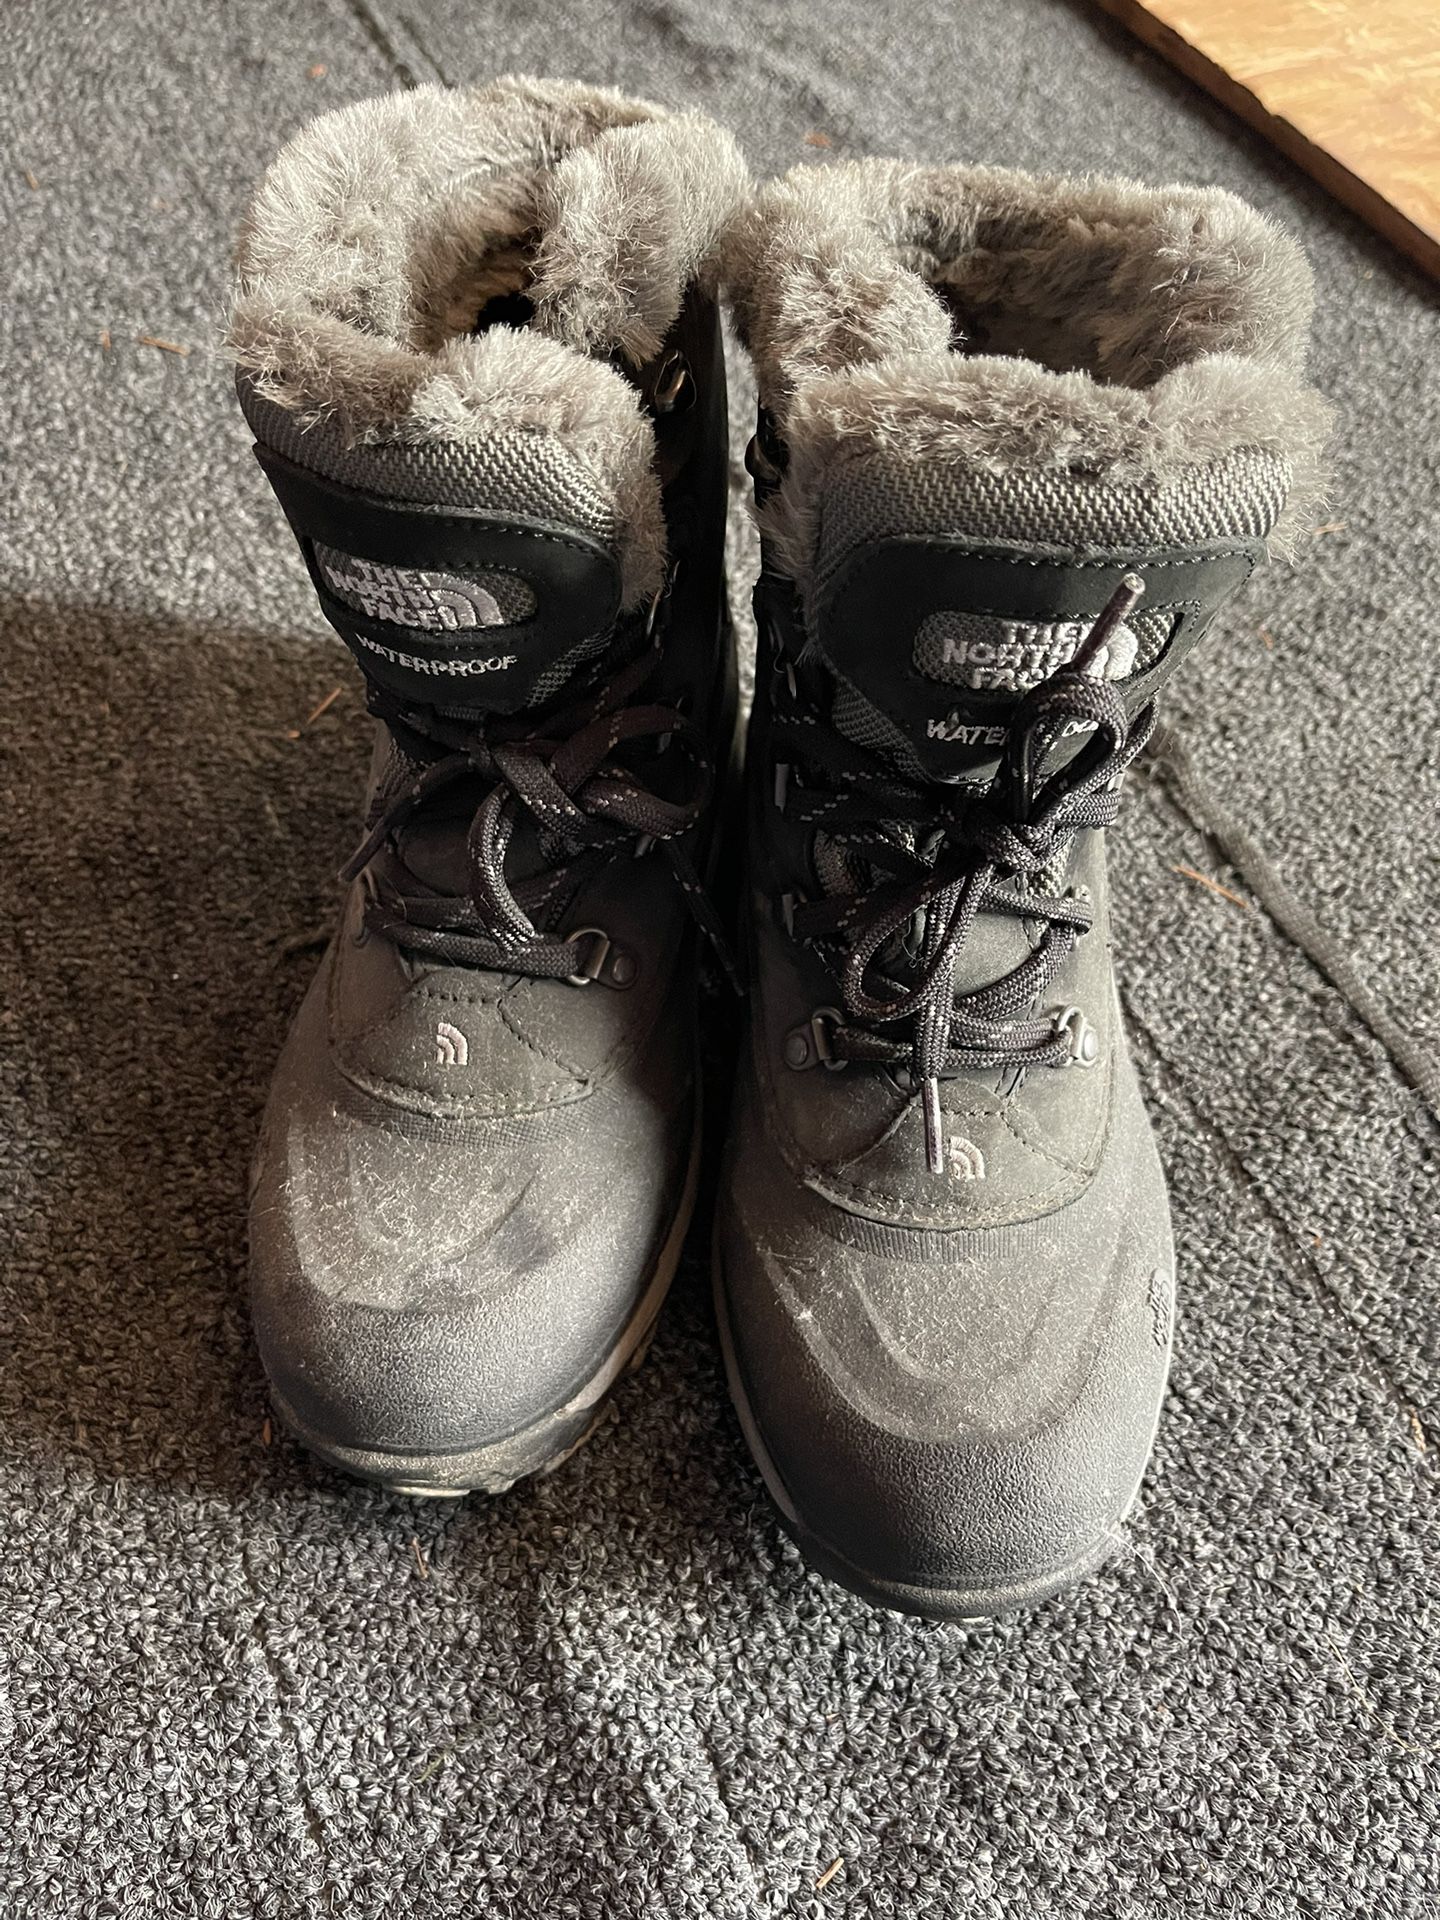 Women’s North Face Snow Boots